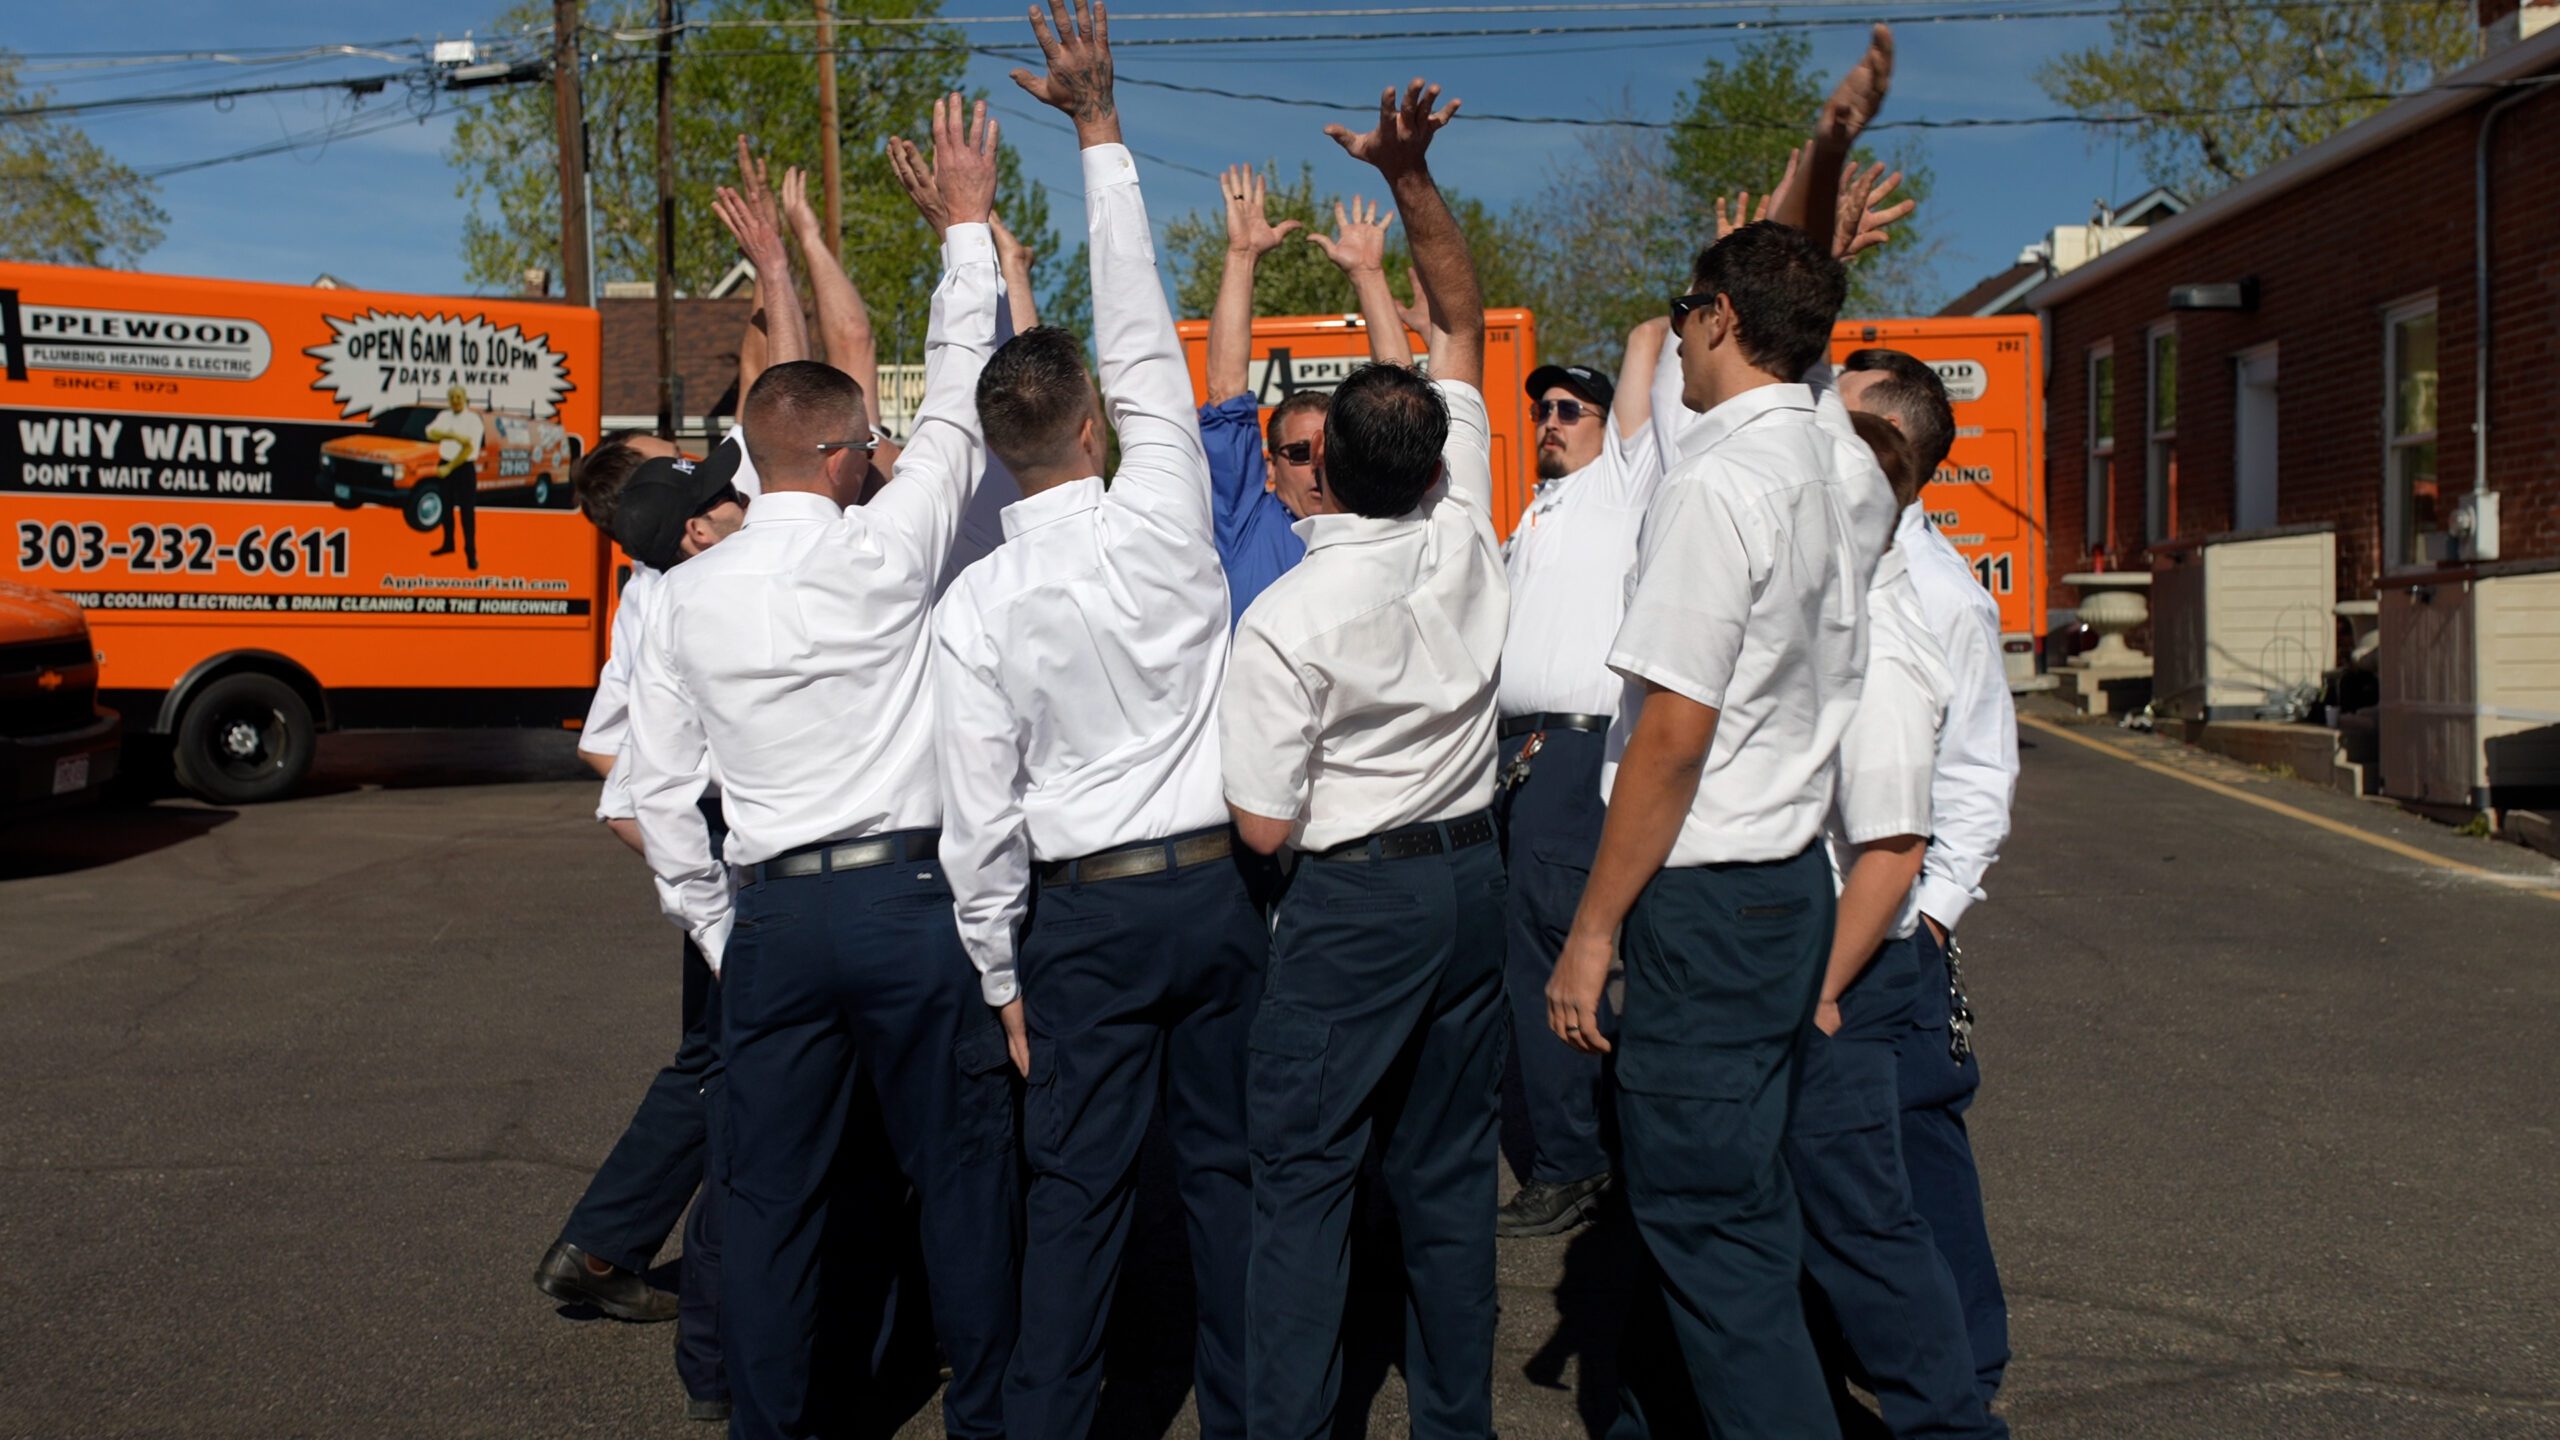 applewood employees gathered in a circle with hands in the air